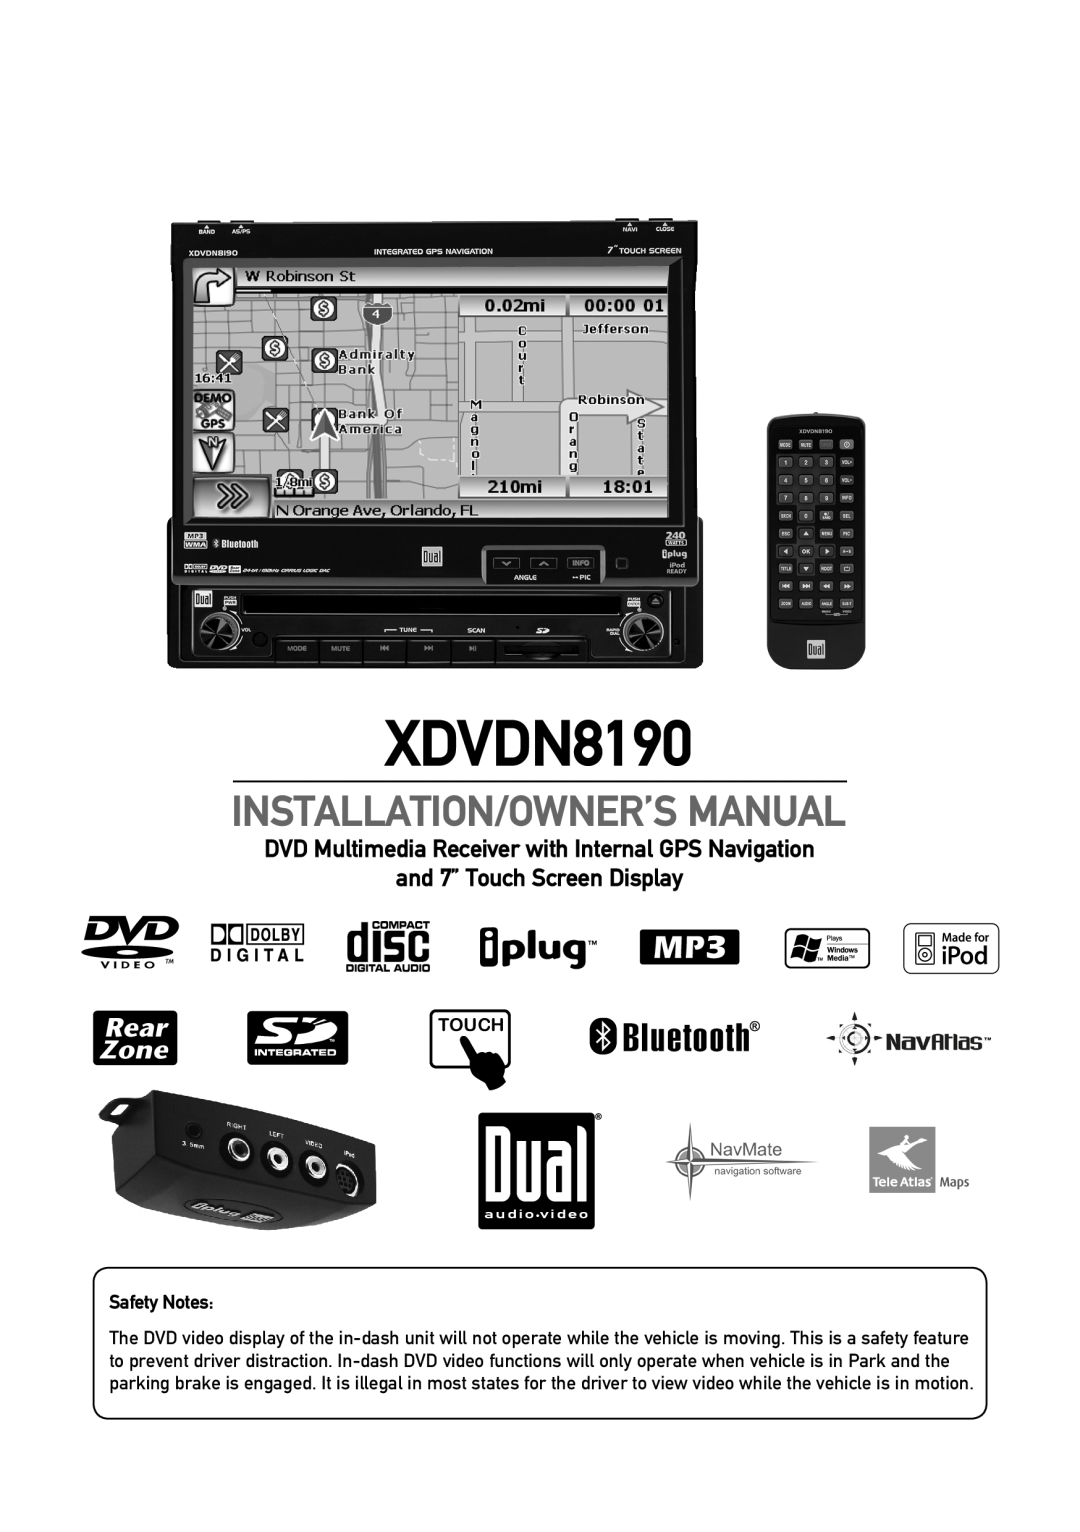 Dual XDVDN8190 owner manual Installation/Owner’S Manual, Safety Notes, Touch 